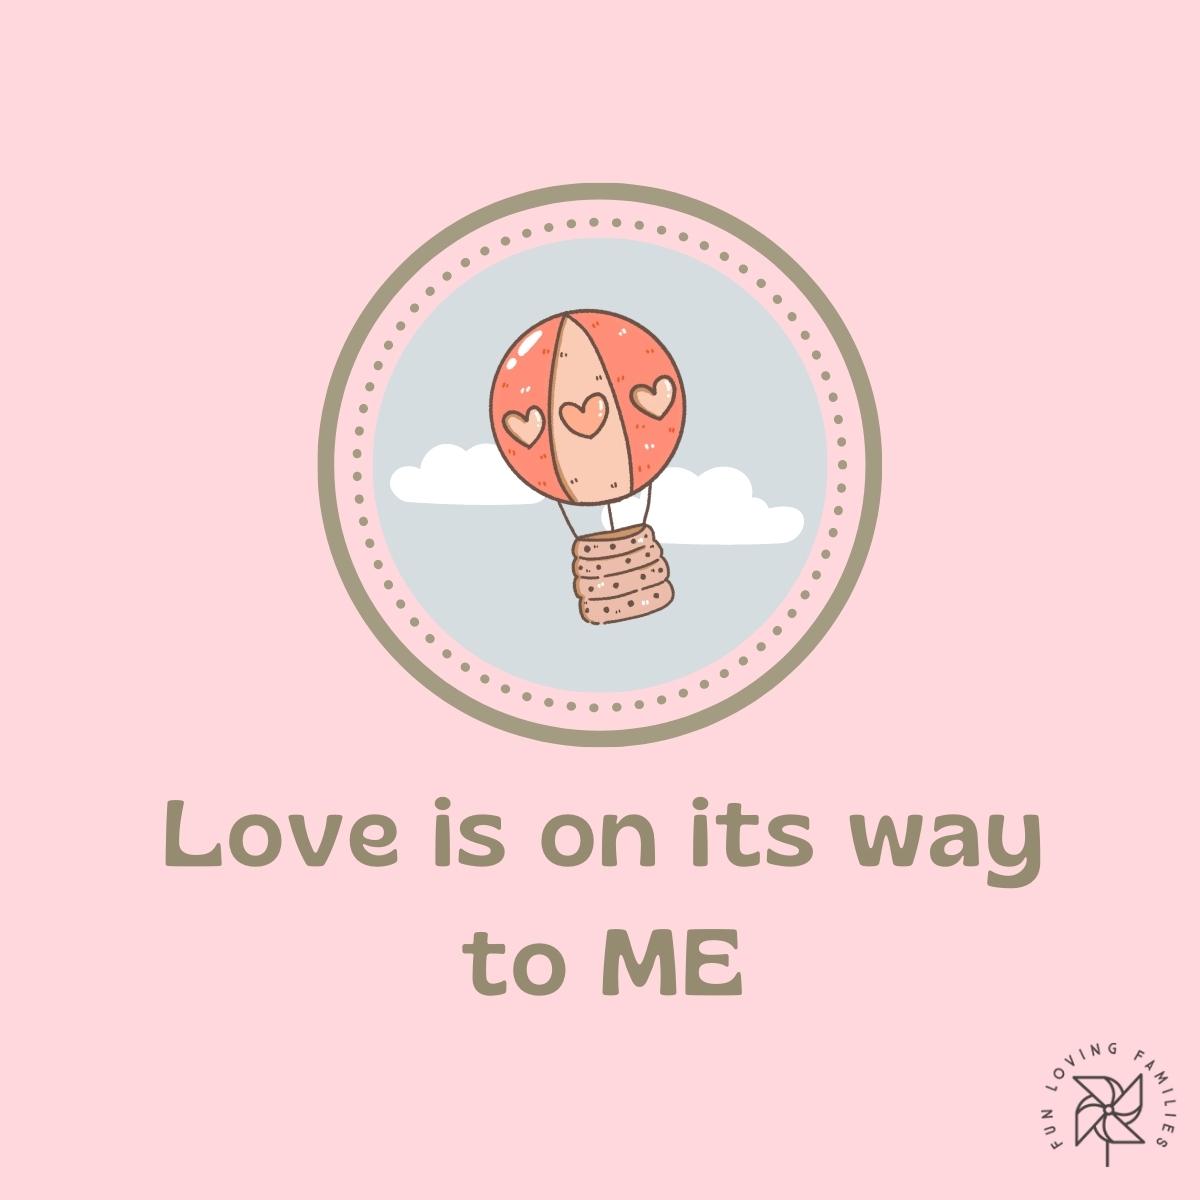 Love is on its way to me affirmation image